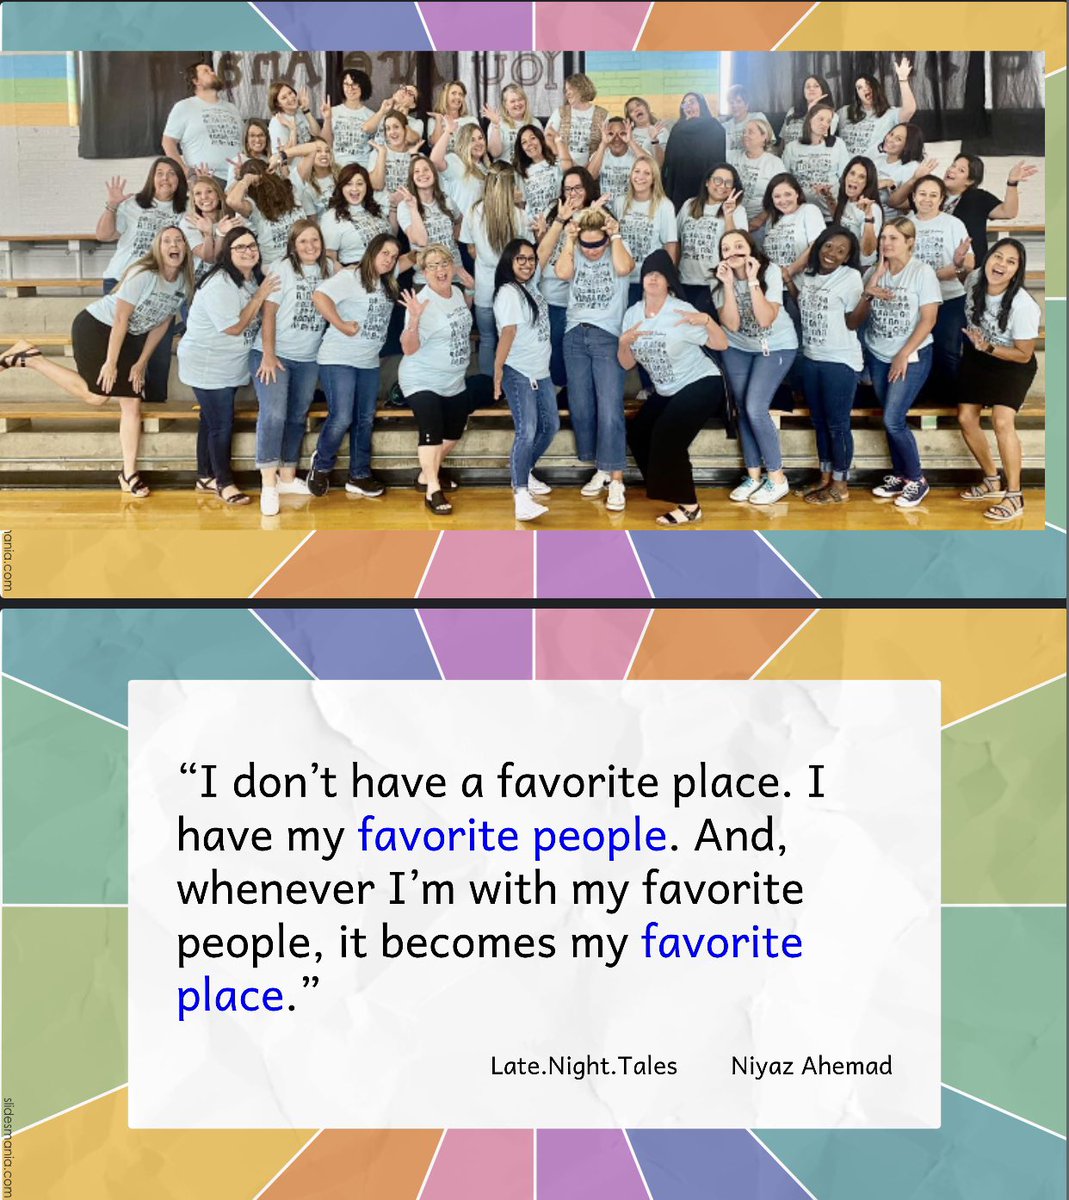 These people. They are everything!! Brilliant, innovative, flexible, compassionate, hilarious, but most of all, they LOVE our students dearly. They make each day BRIGHT at @WilemonSTEAM! #myfavoritepeople #myfavoriteplace #wilemonsteam